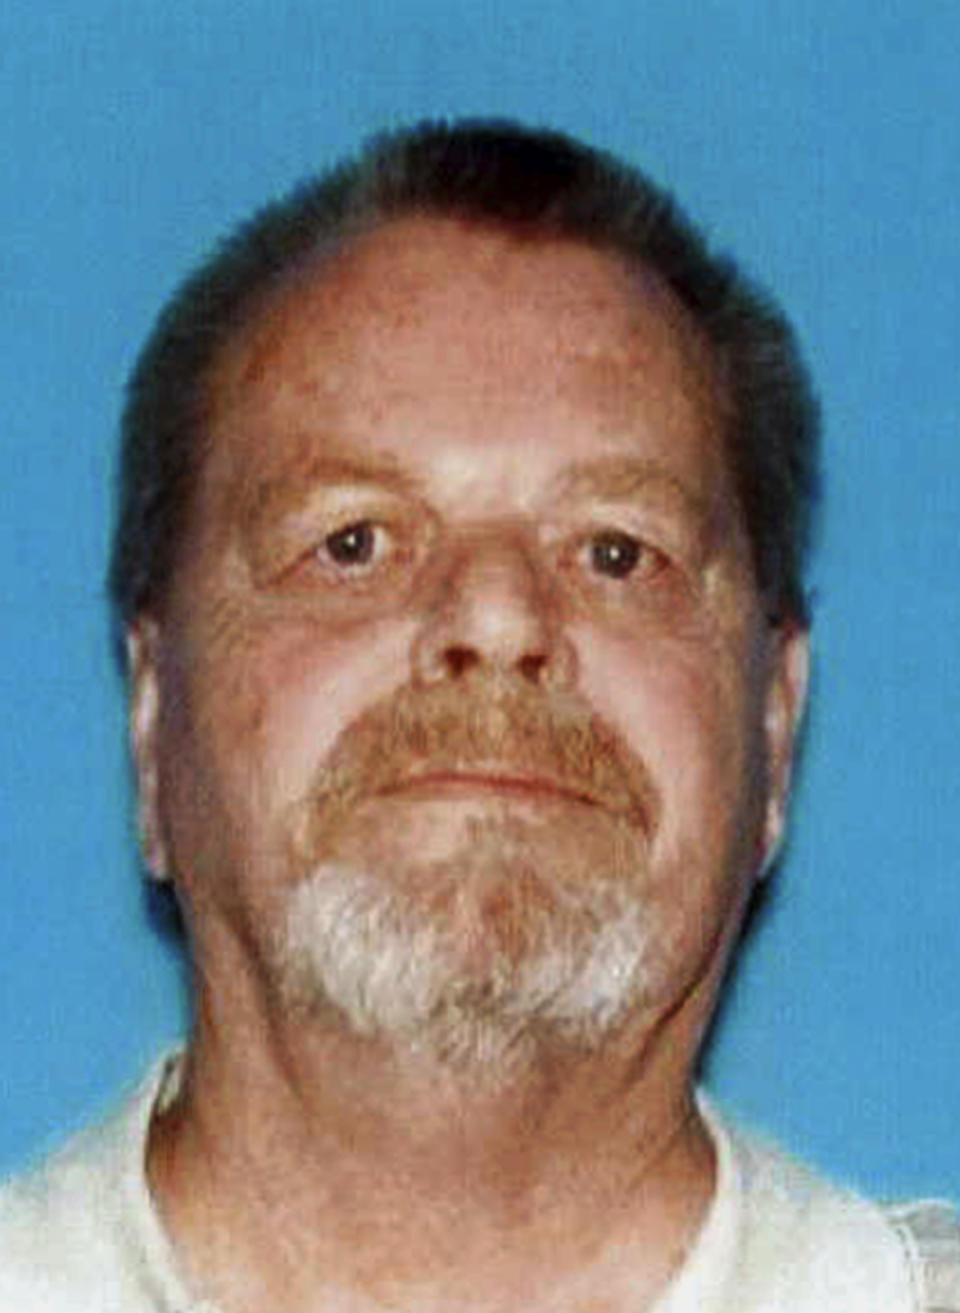 This undated photo provided by the Newport Beach Police Department shows James Neal. Neal, 72, was arrested in Colorado Springs, Colo., and charged with murder with special circumstances in the death of Linda O'Keefe, who was found strangled in 1973, a case that has long shaken the seaside community of Newport Beach, Calif., Orange County District Attorney Todd Spitzer said. (Newport Beach Police Department via AP)